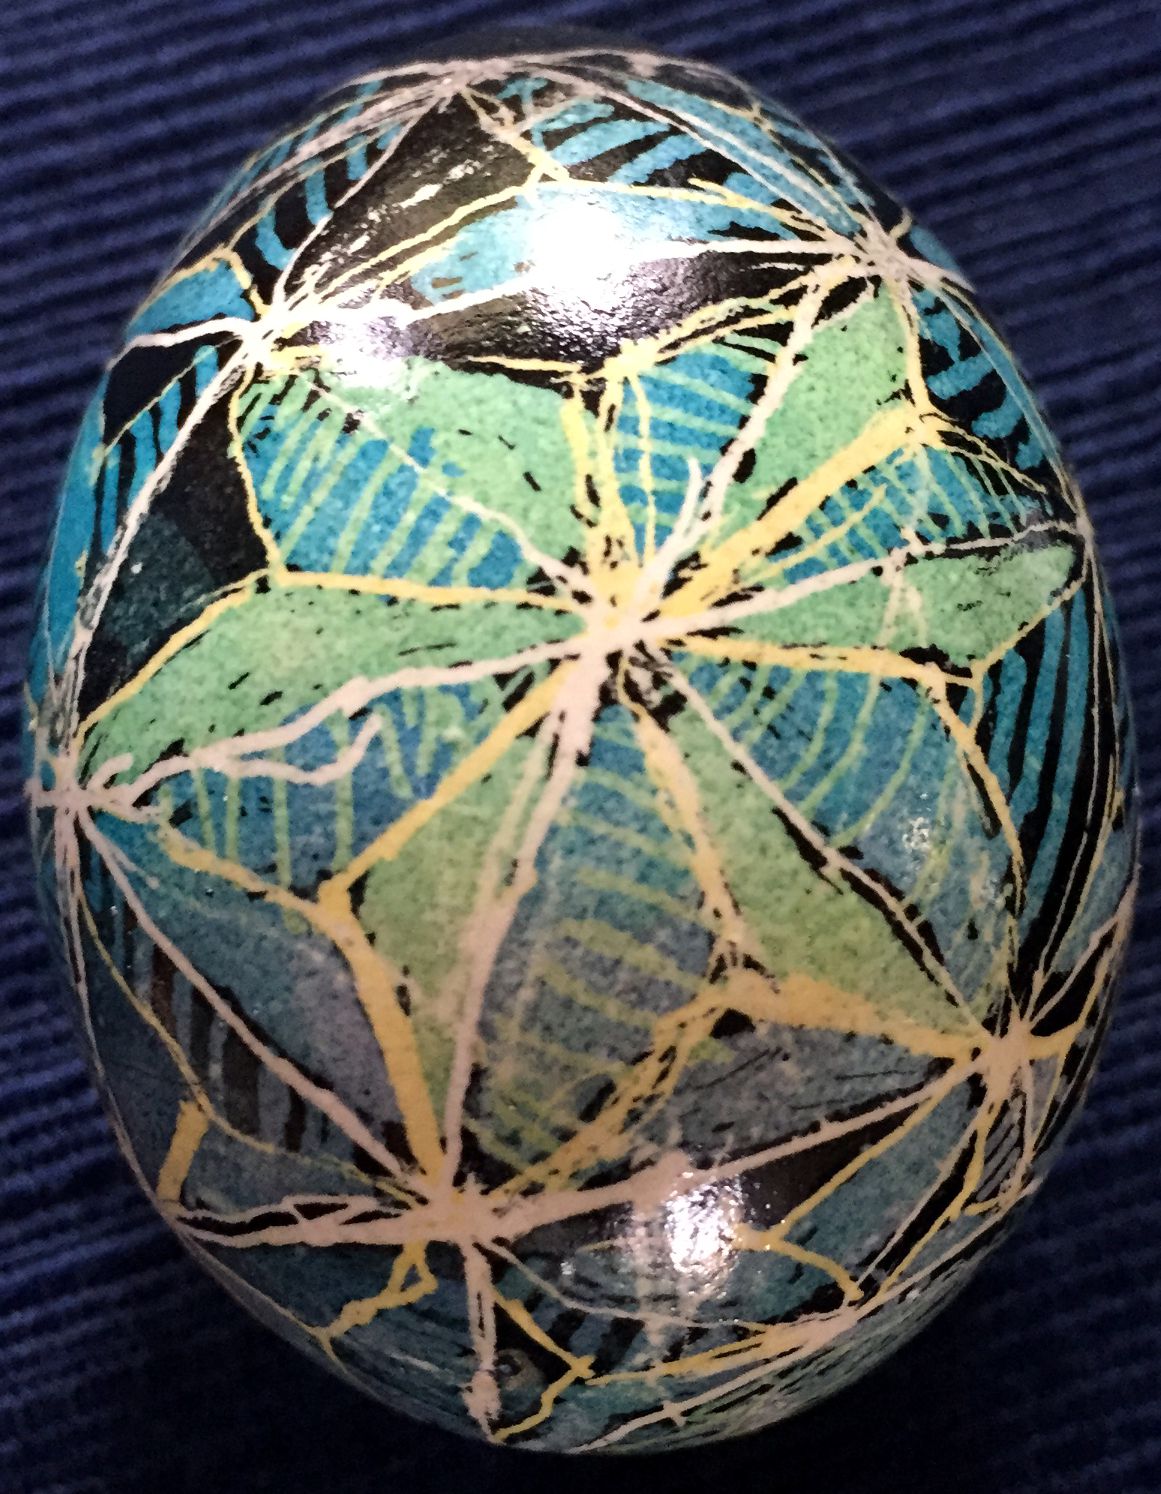 Another side of the egg.  Similar to the first side, except some of the triangles have black replaced with green.